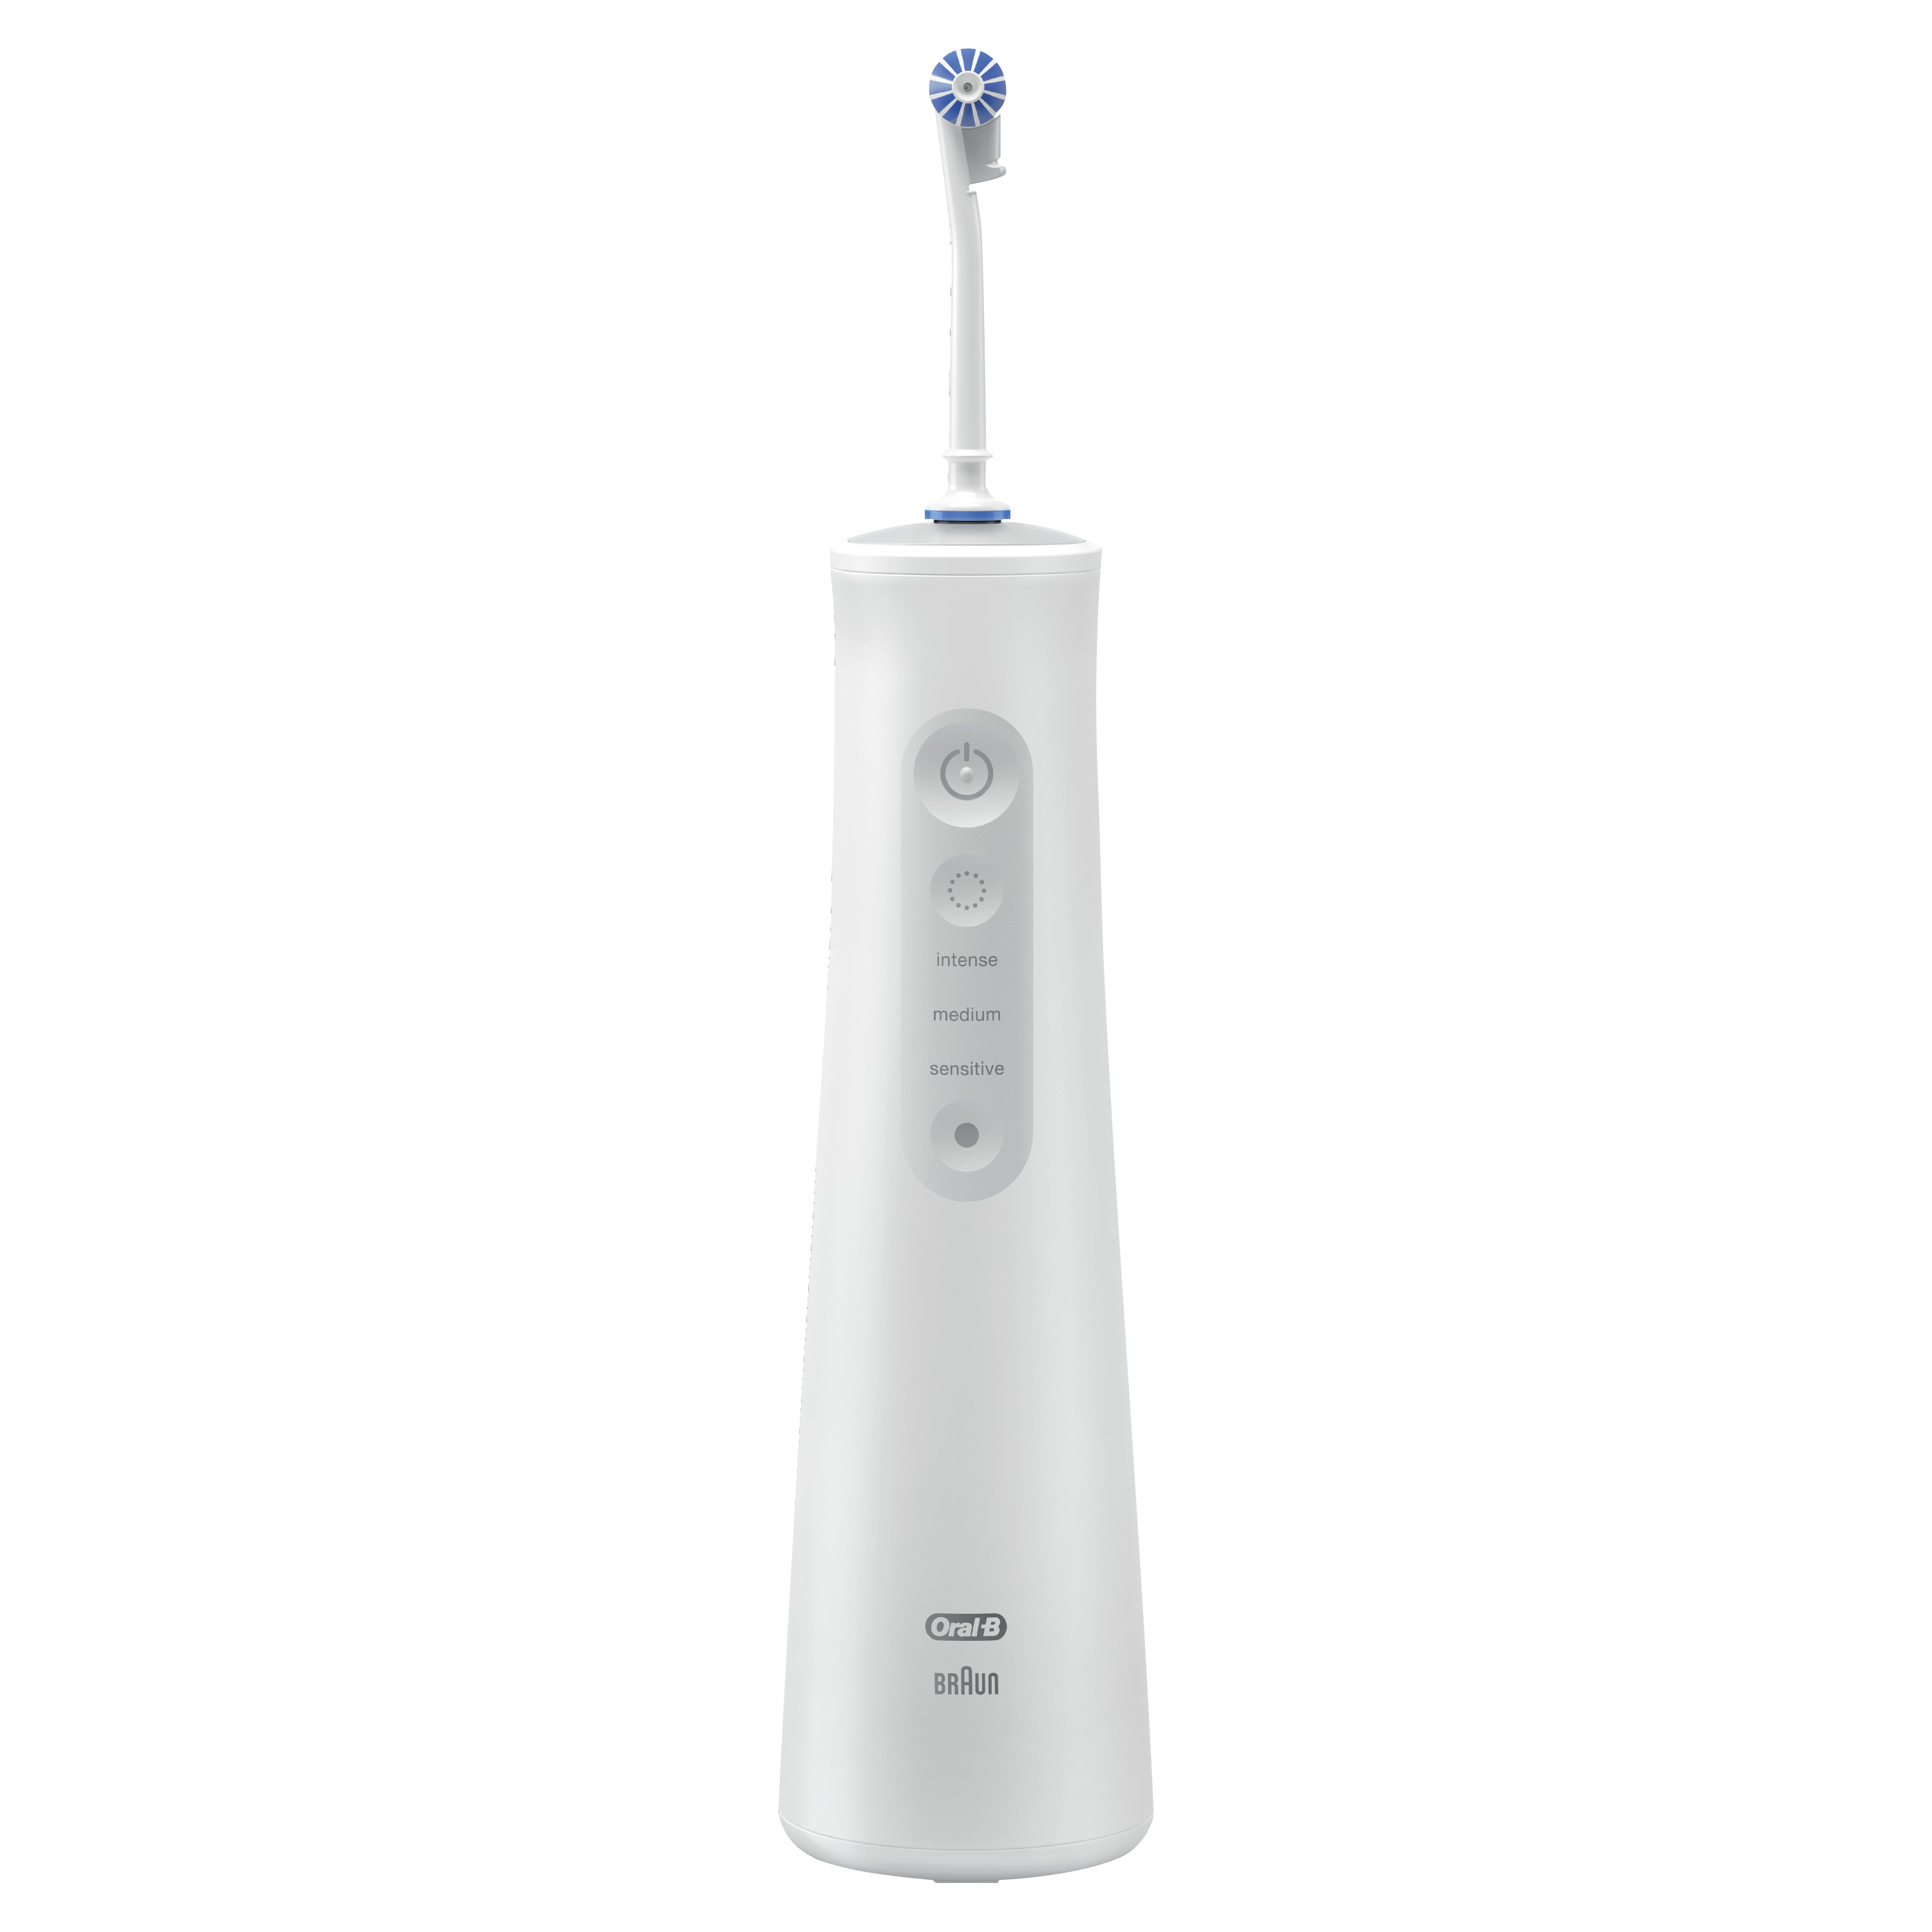 Oral-B Water Flosser Advanced, Portable Oral Irrigator Handle with 2 Nozzles, White - image 3 of 6